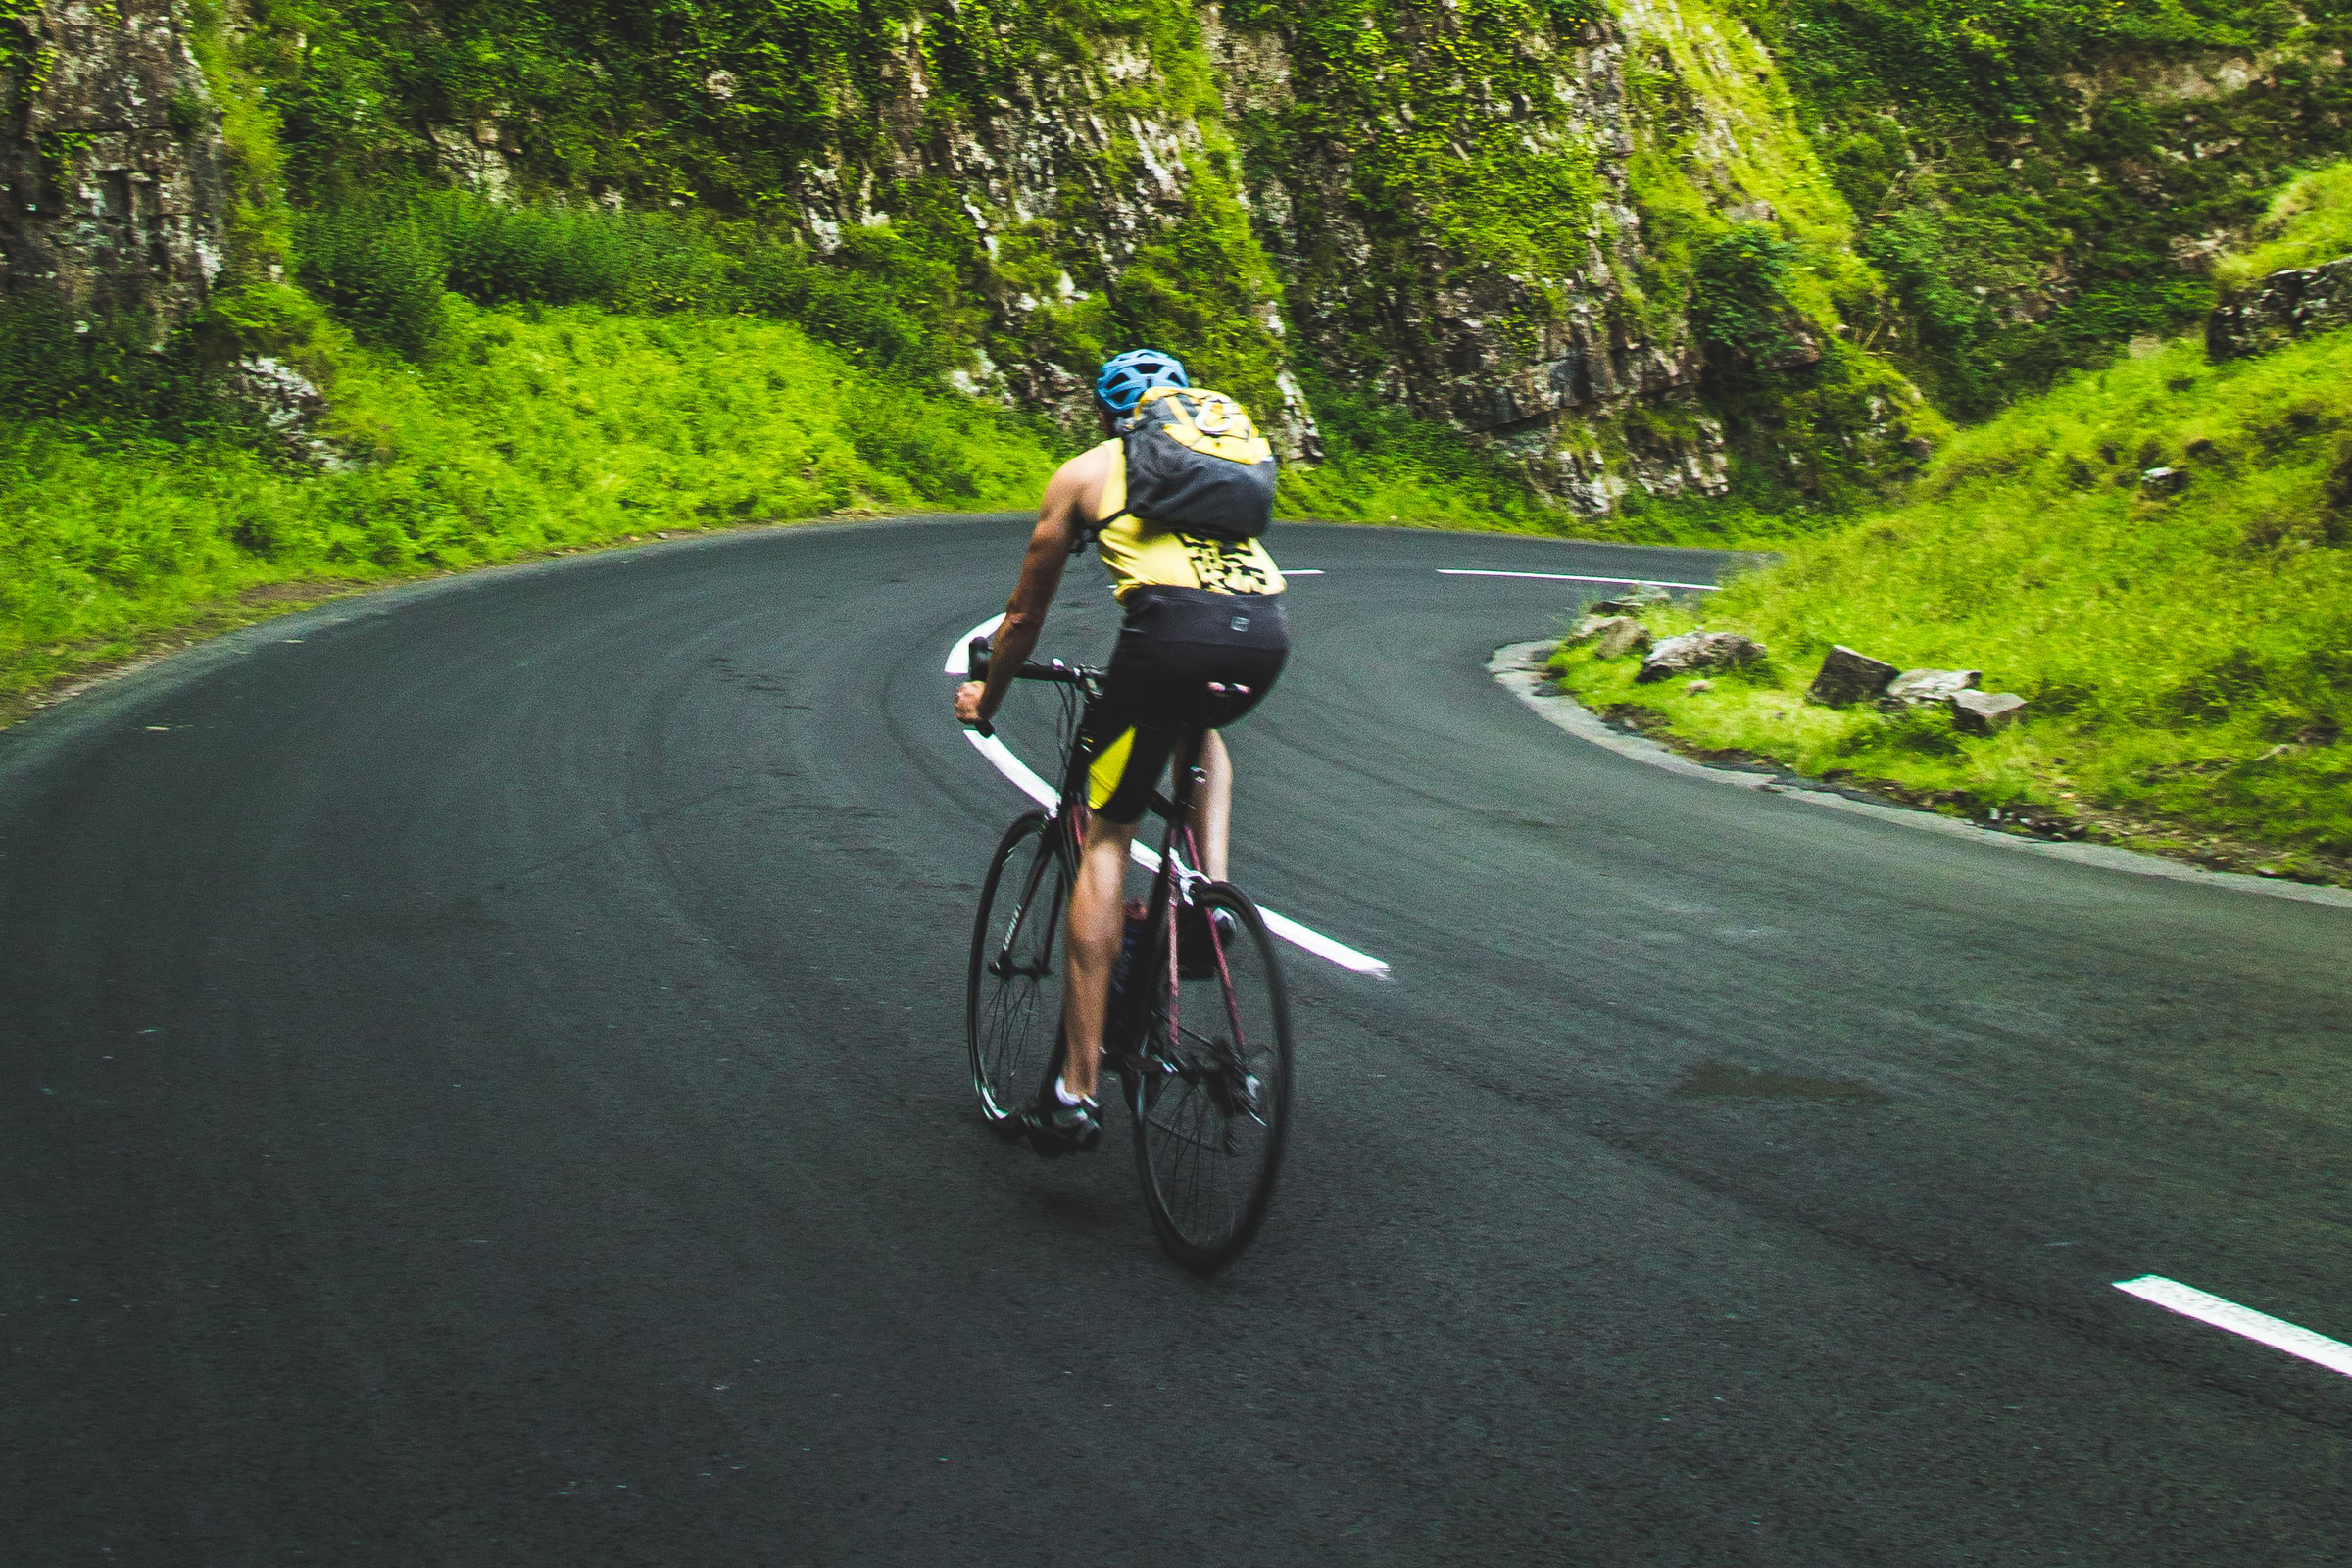 Person cycling on a grassy mountain road